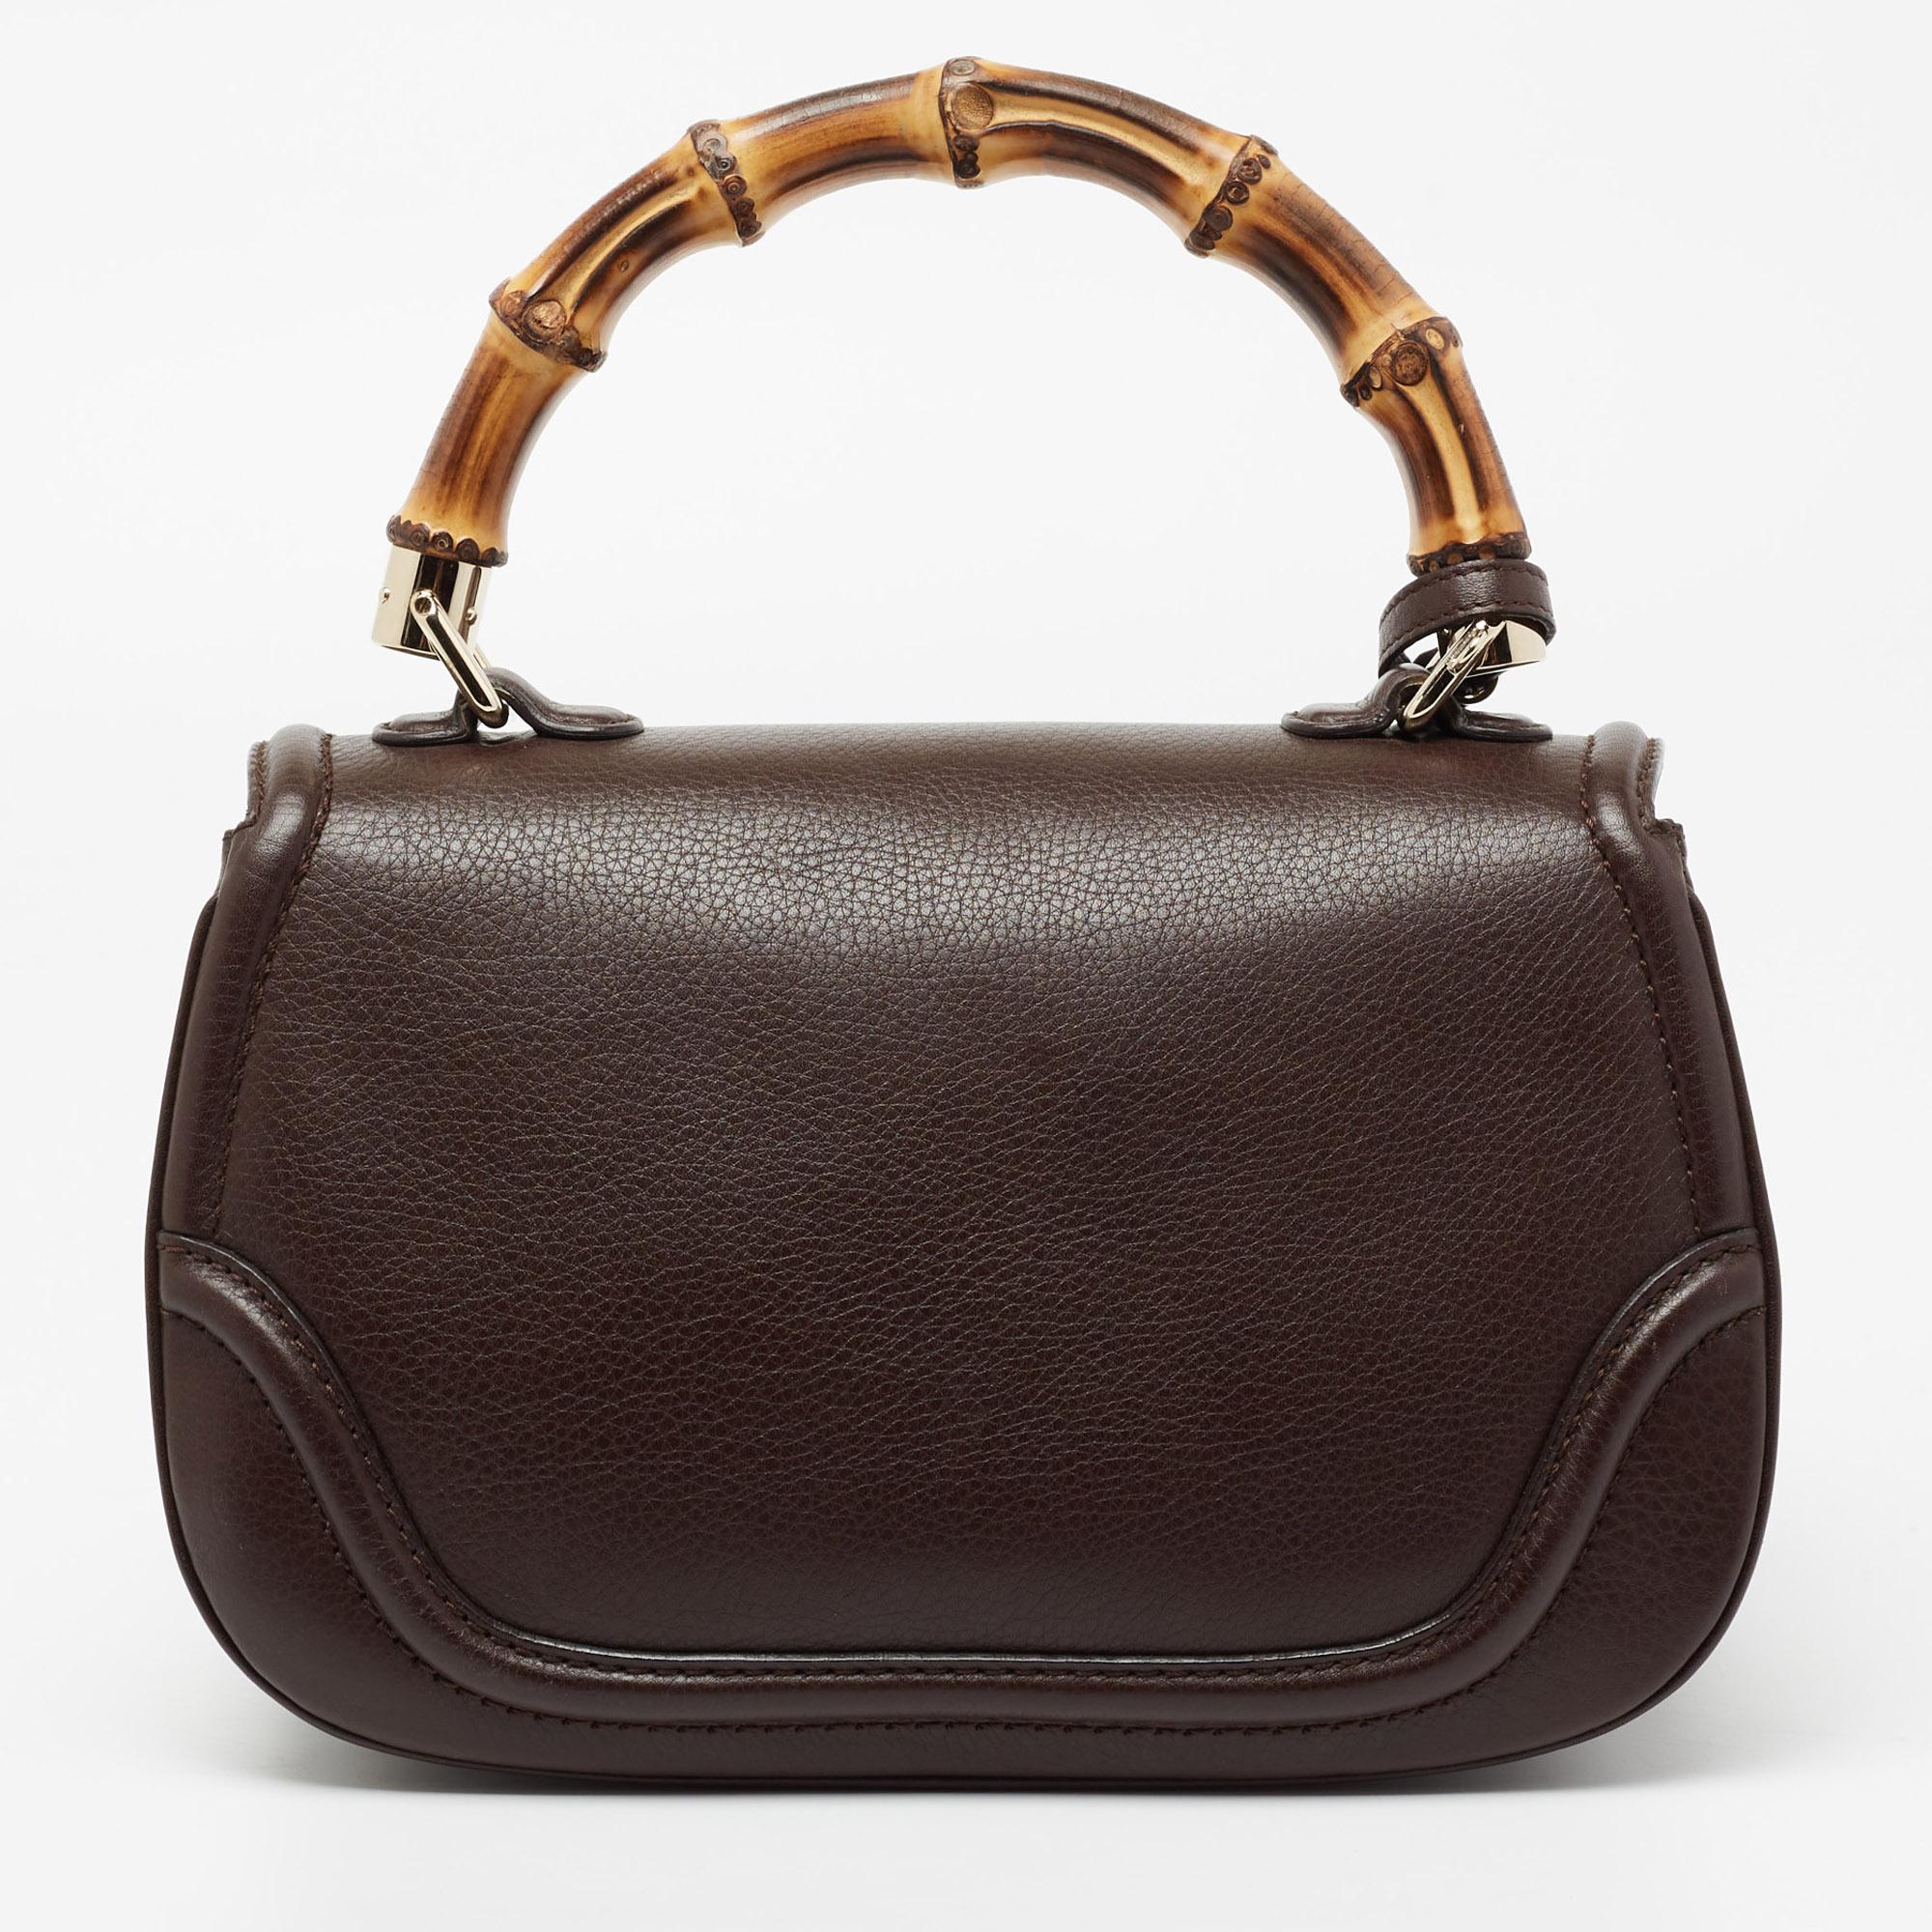 This Gucci bag embodies classic allure with refined construction and well-executed details. Lined with fabric, it is capable of storing all your daily essentials neatly. The bamboo handle at the top and lock closure on the front flap serves as